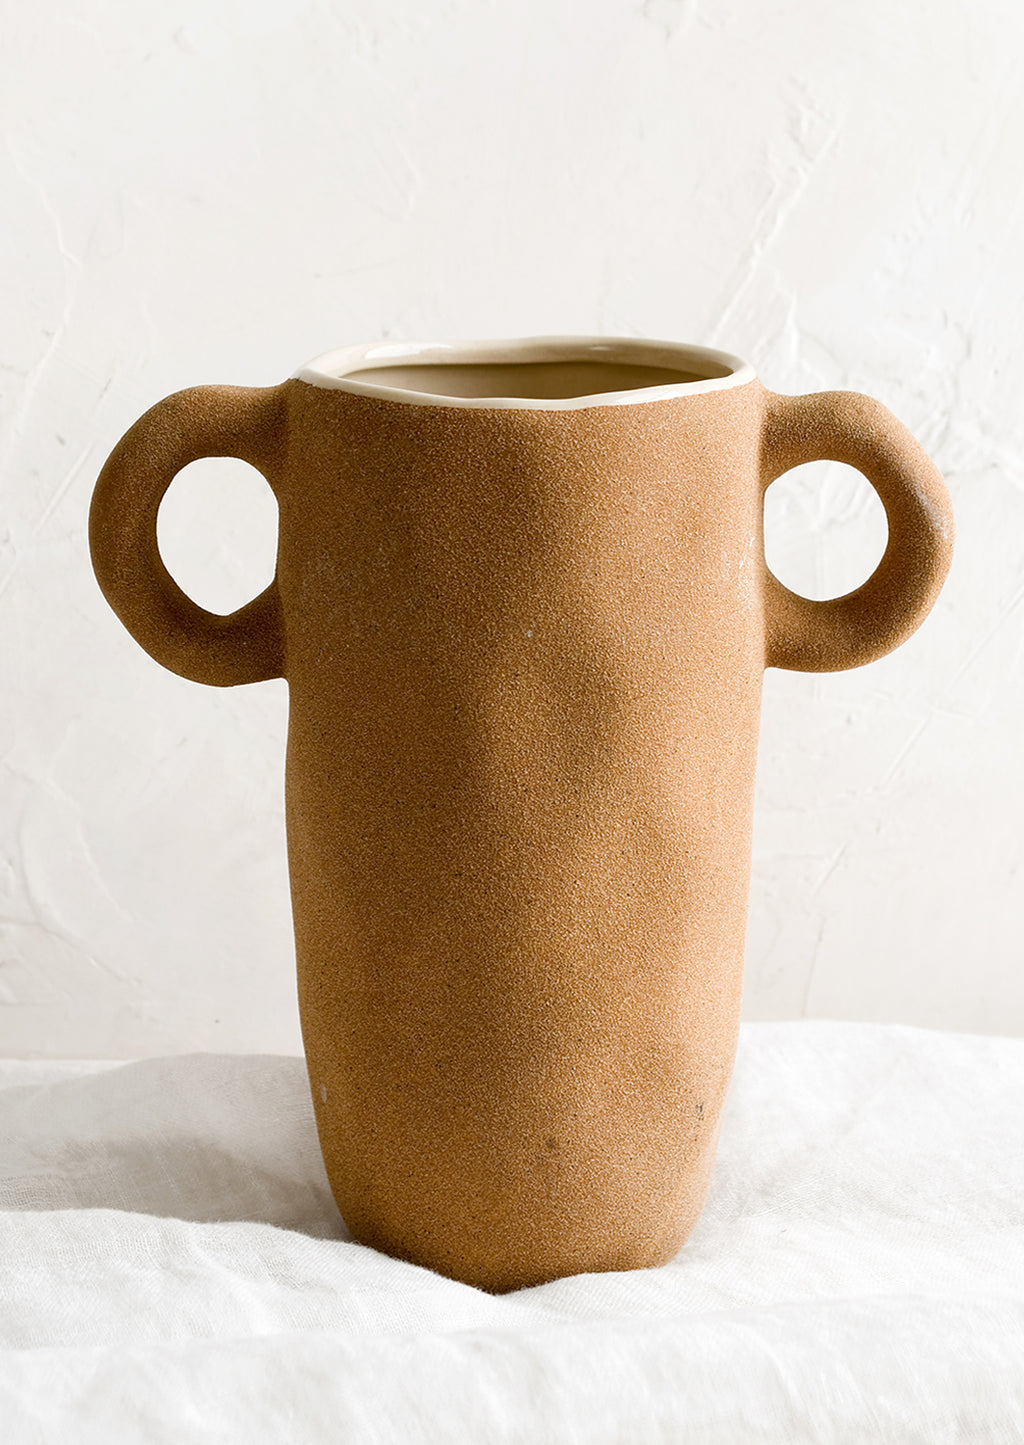 1: A ceramic vase in tall shape with round side handles at top.